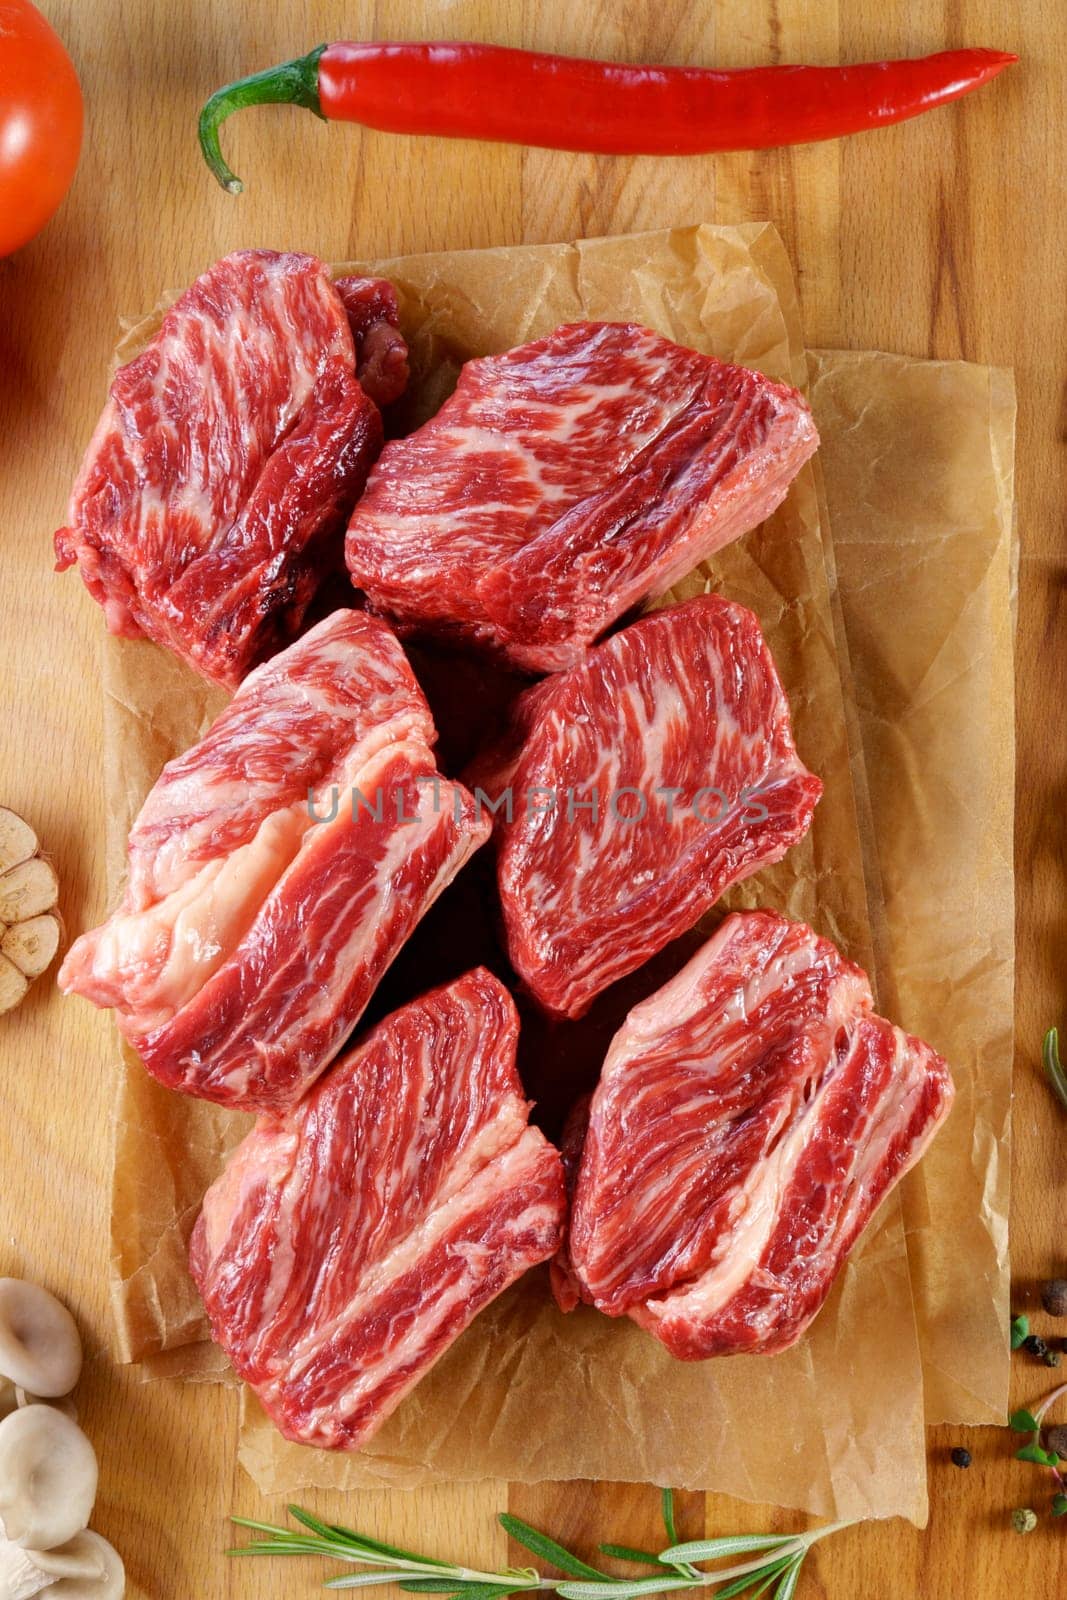 Raw steak on wooden background, raw meat for cooking steak, spices. Vertical photo